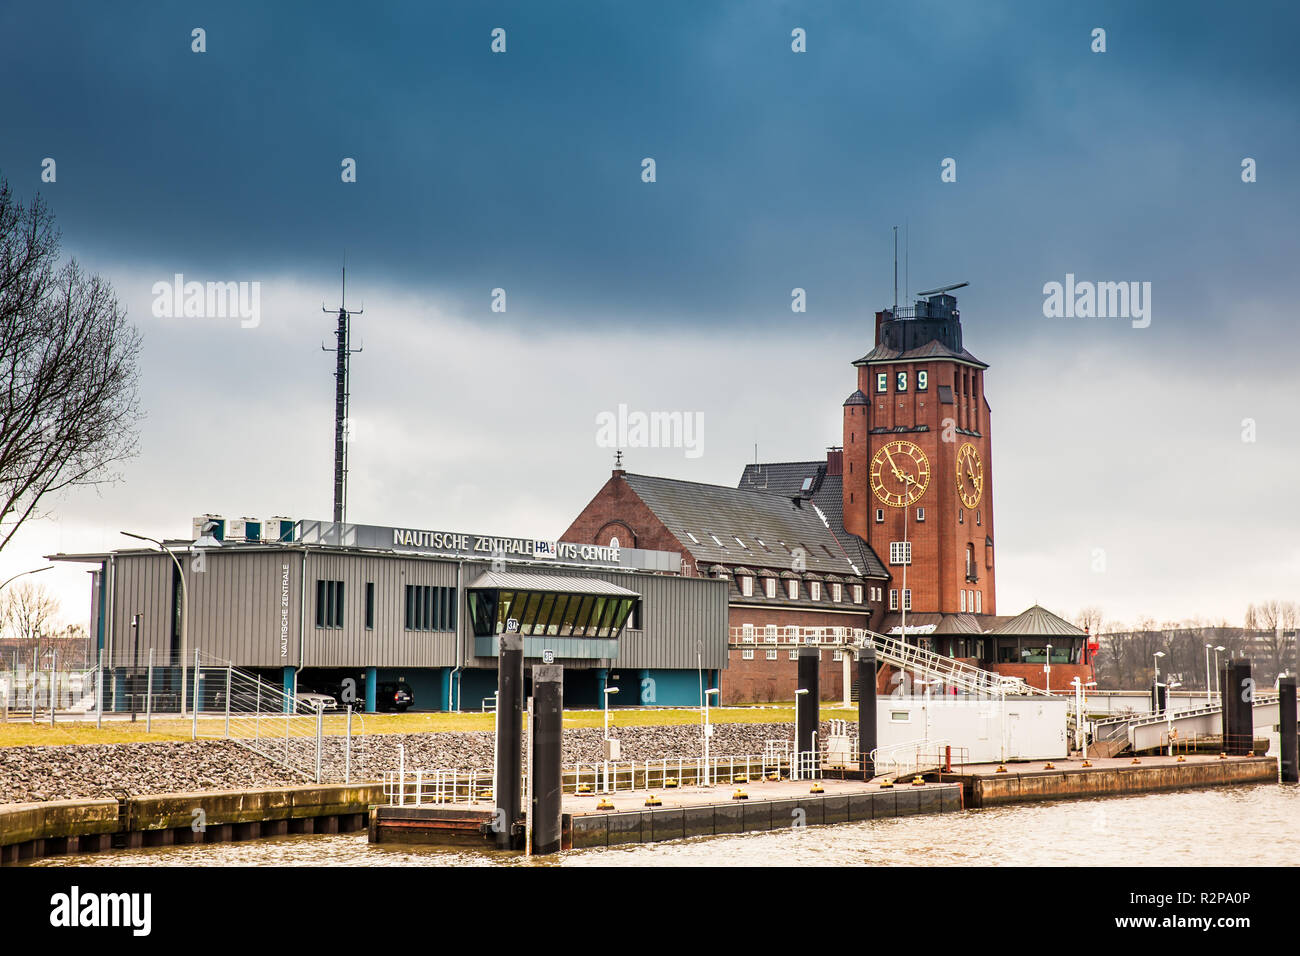 HAMBURG, GERMANY - MARCH, 2018: Navigator Tower at Finkenwerder on the banks of the Elbe river in Hamburg Stock Photo